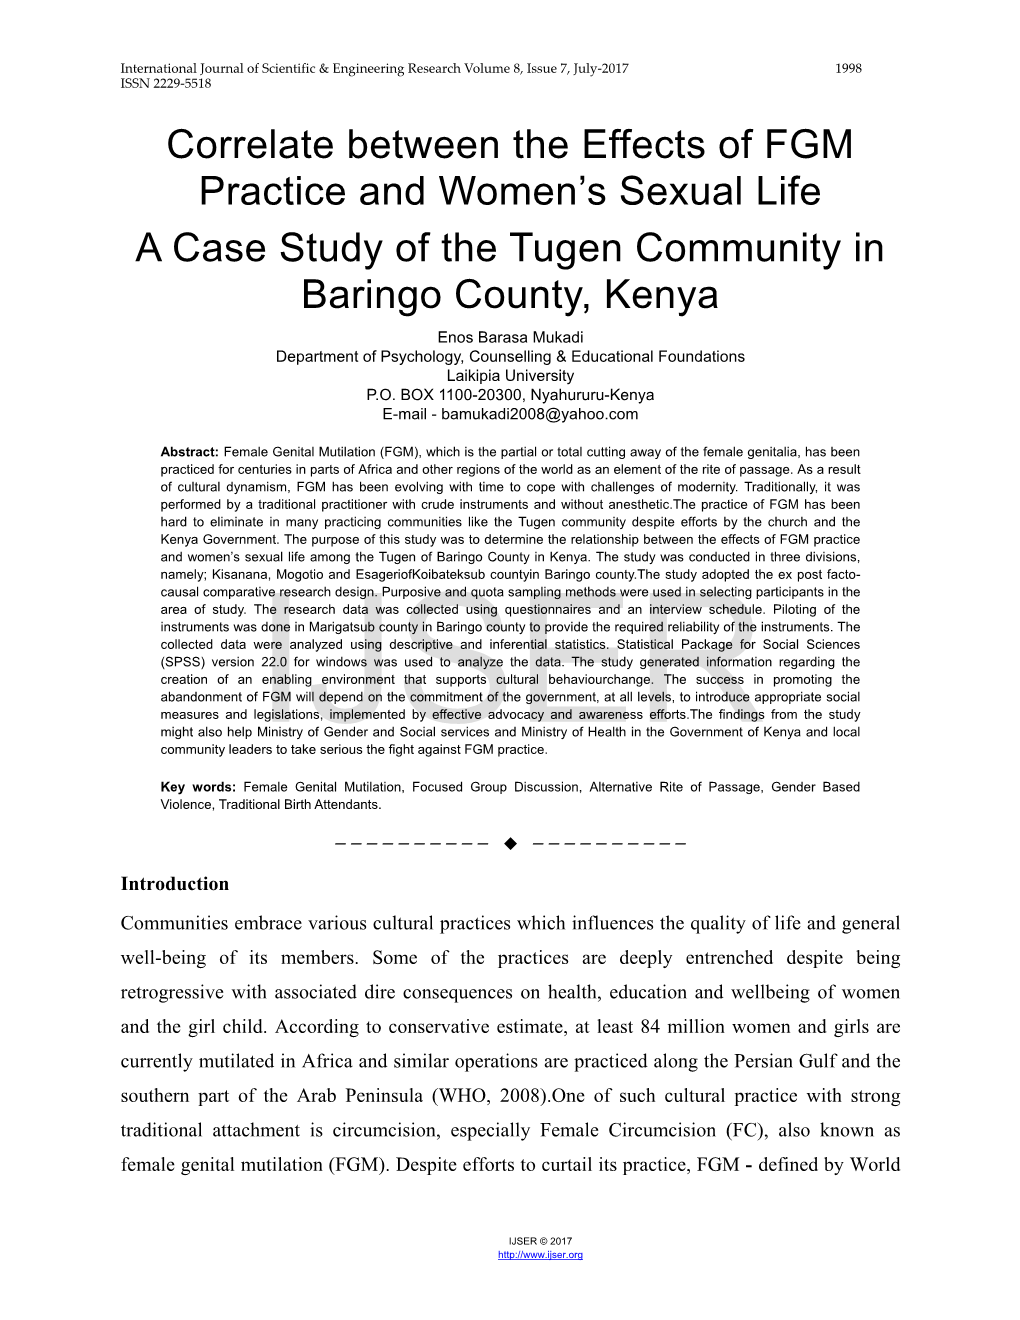 Correlate Between the Effects of FGM Practice and Women's Sexual Life